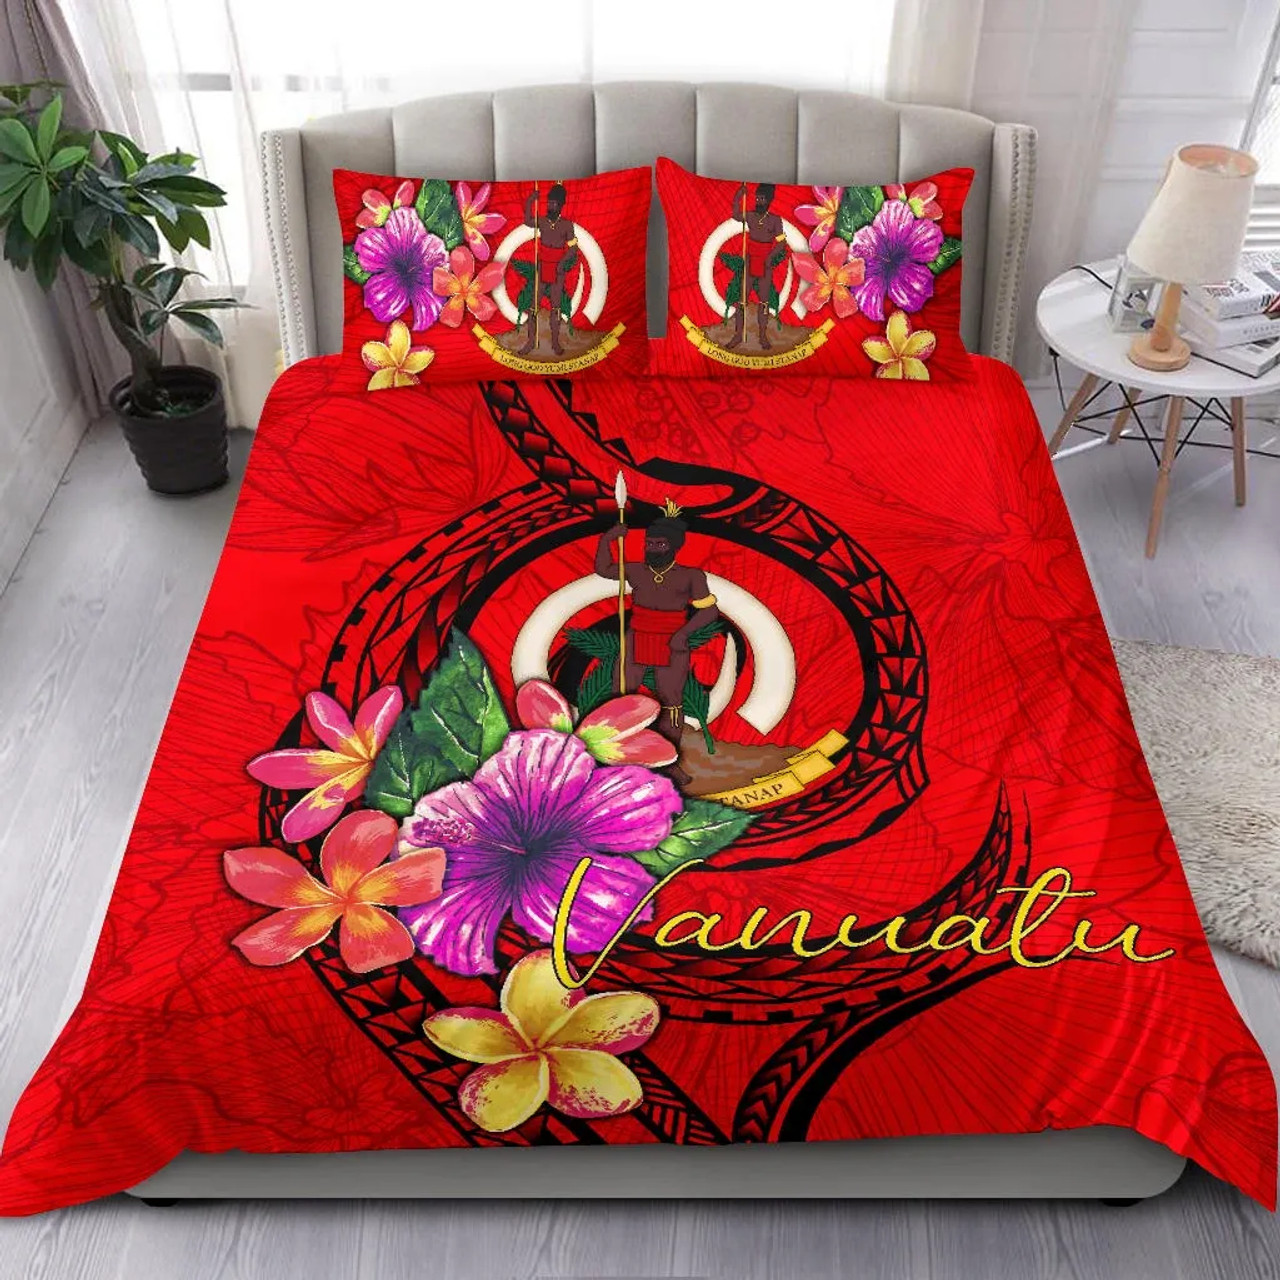 Vanuatu Polynesian Bedding Set - Floral With Seal Red 1